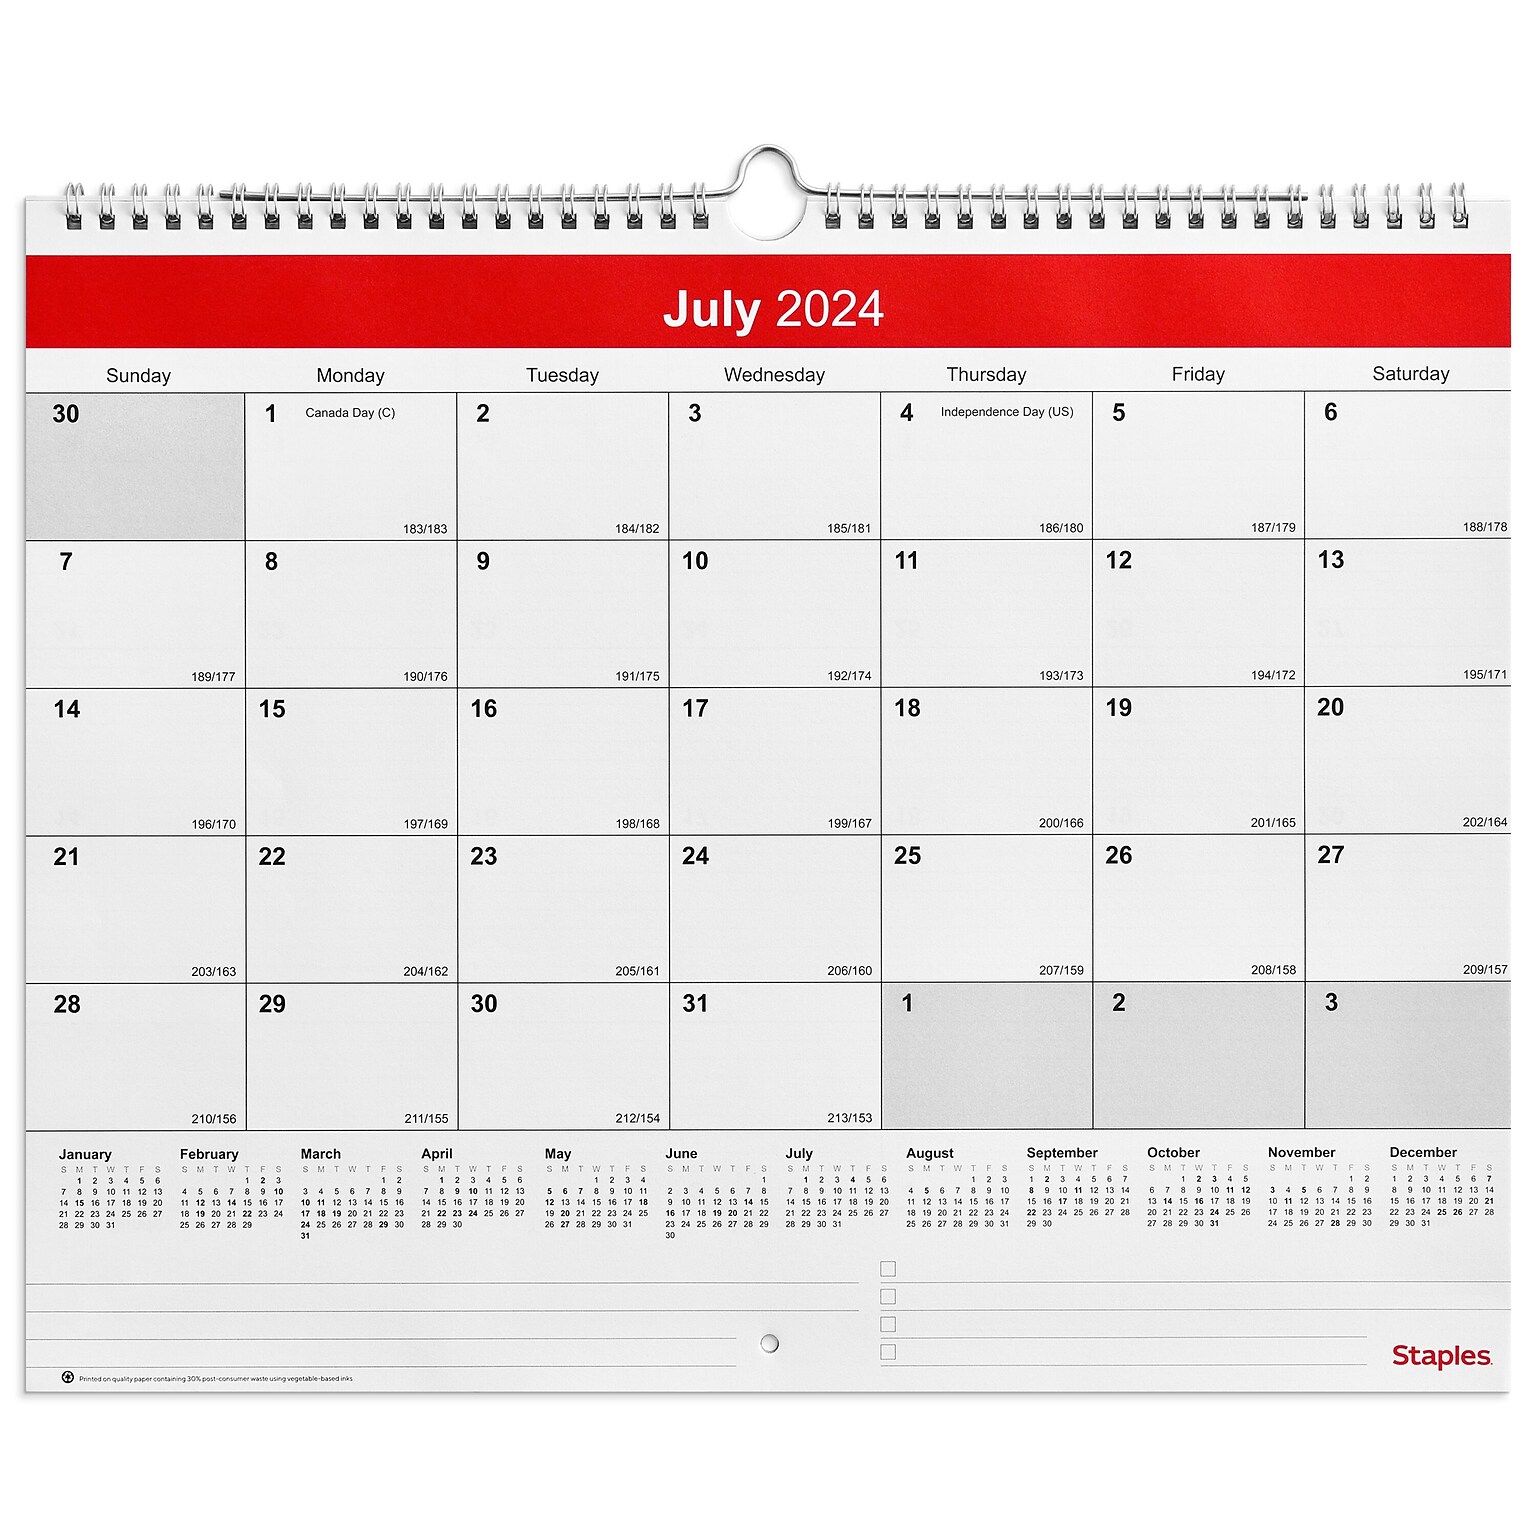 2024-2025 Staples 15 x 12 Academic Monthly Wall Calendar, Red/White  (ST54278-23)